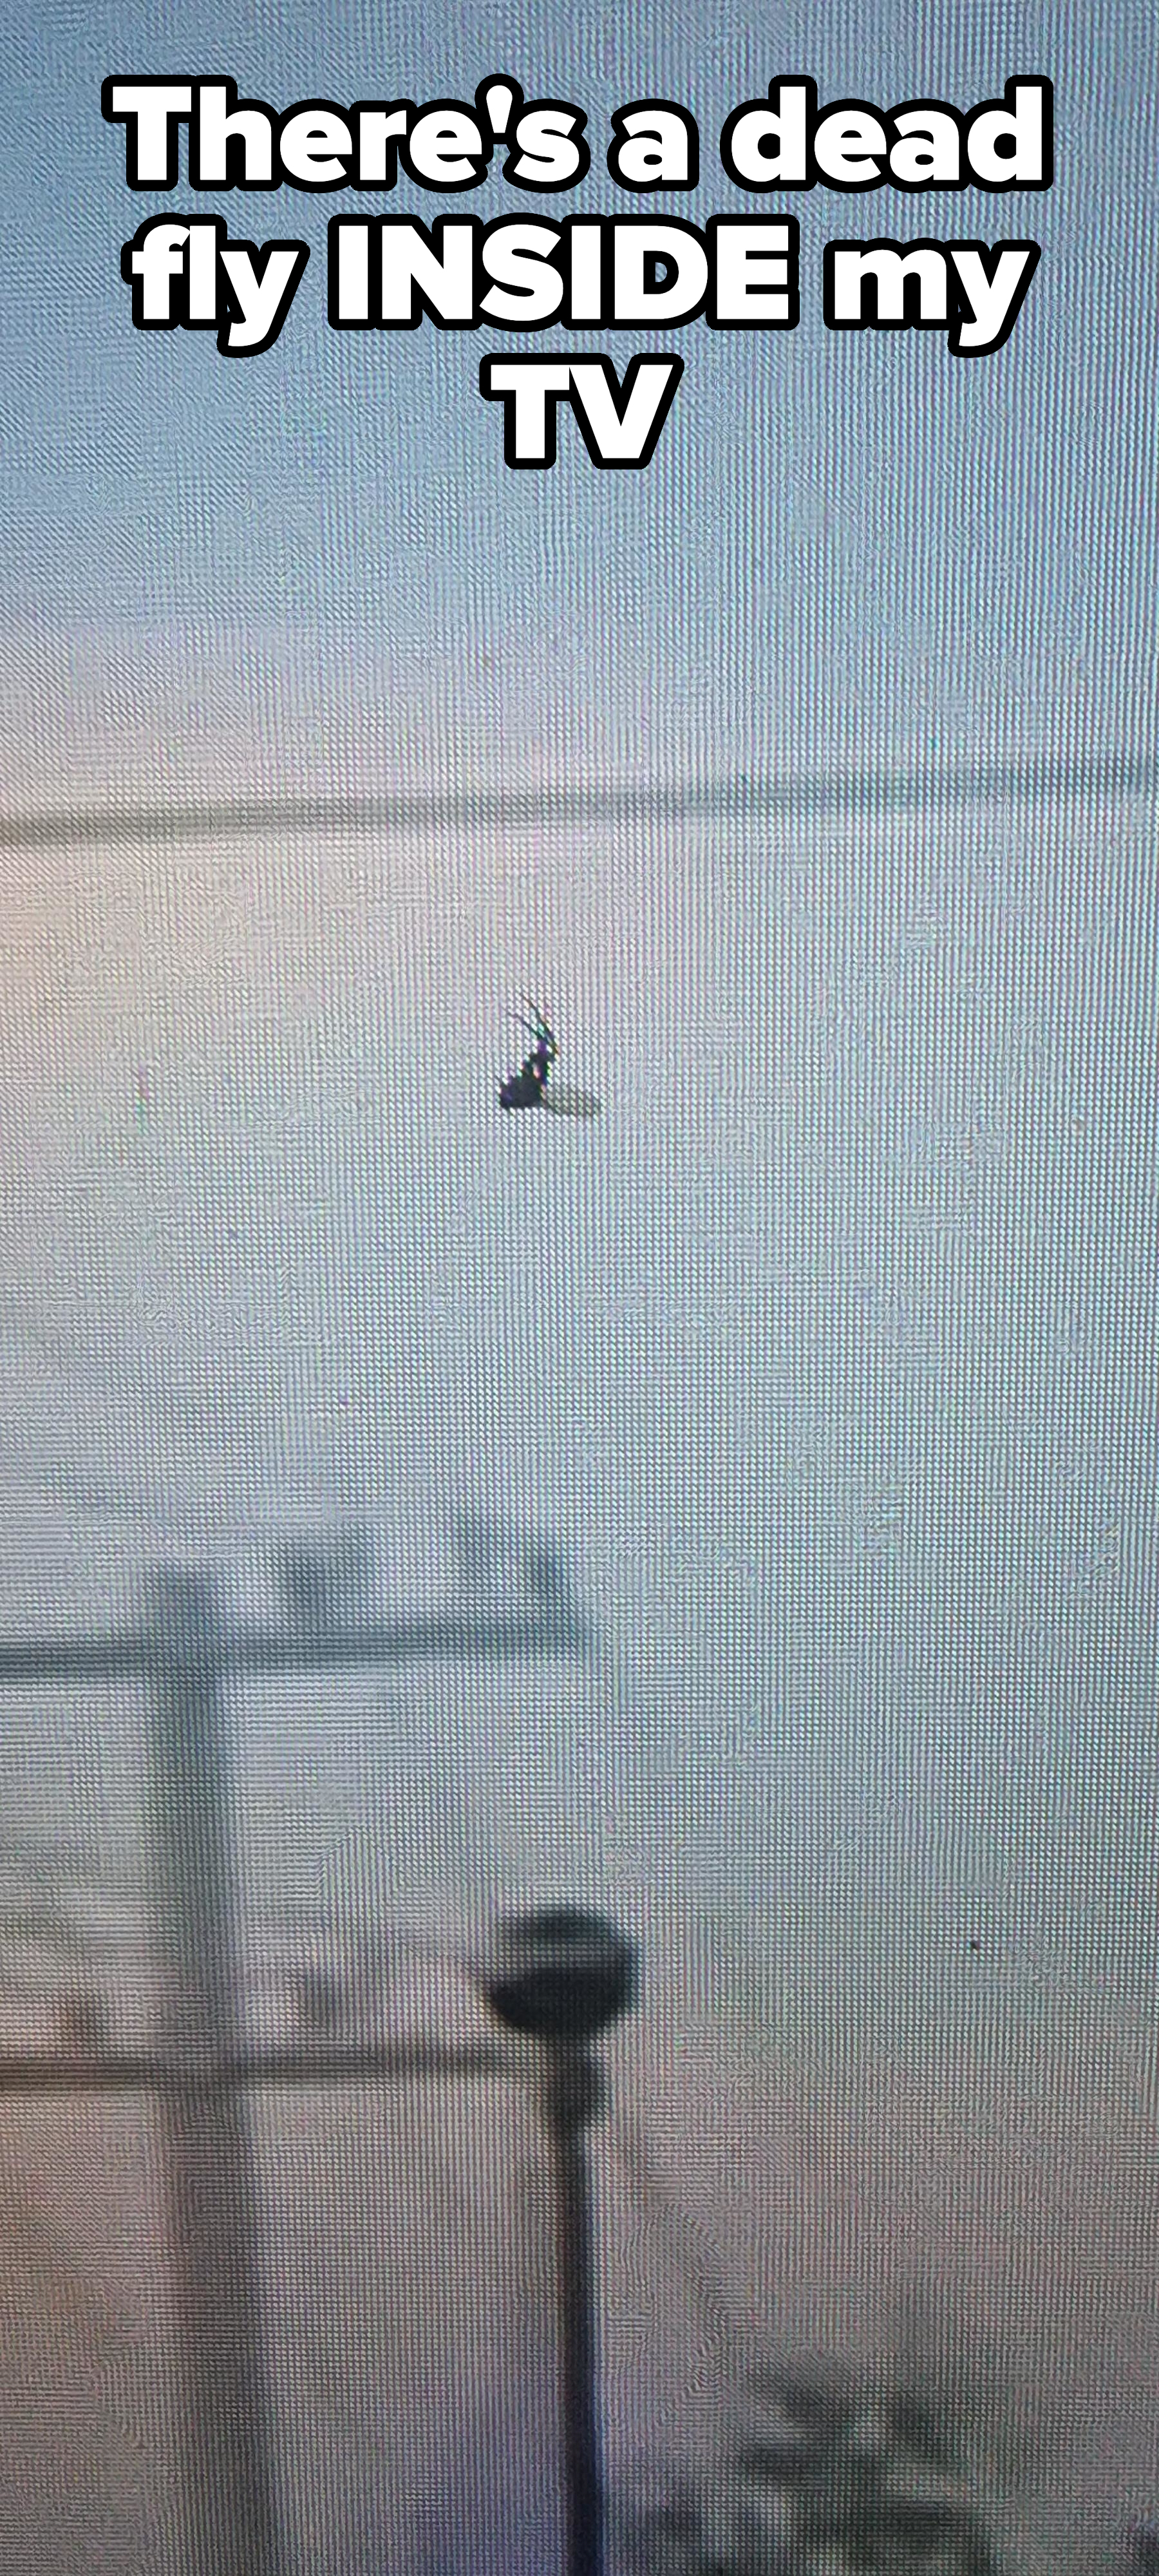 &quot;There&#x27;s a dead fly inside my TV&quot; showing an insect inside a TV screen